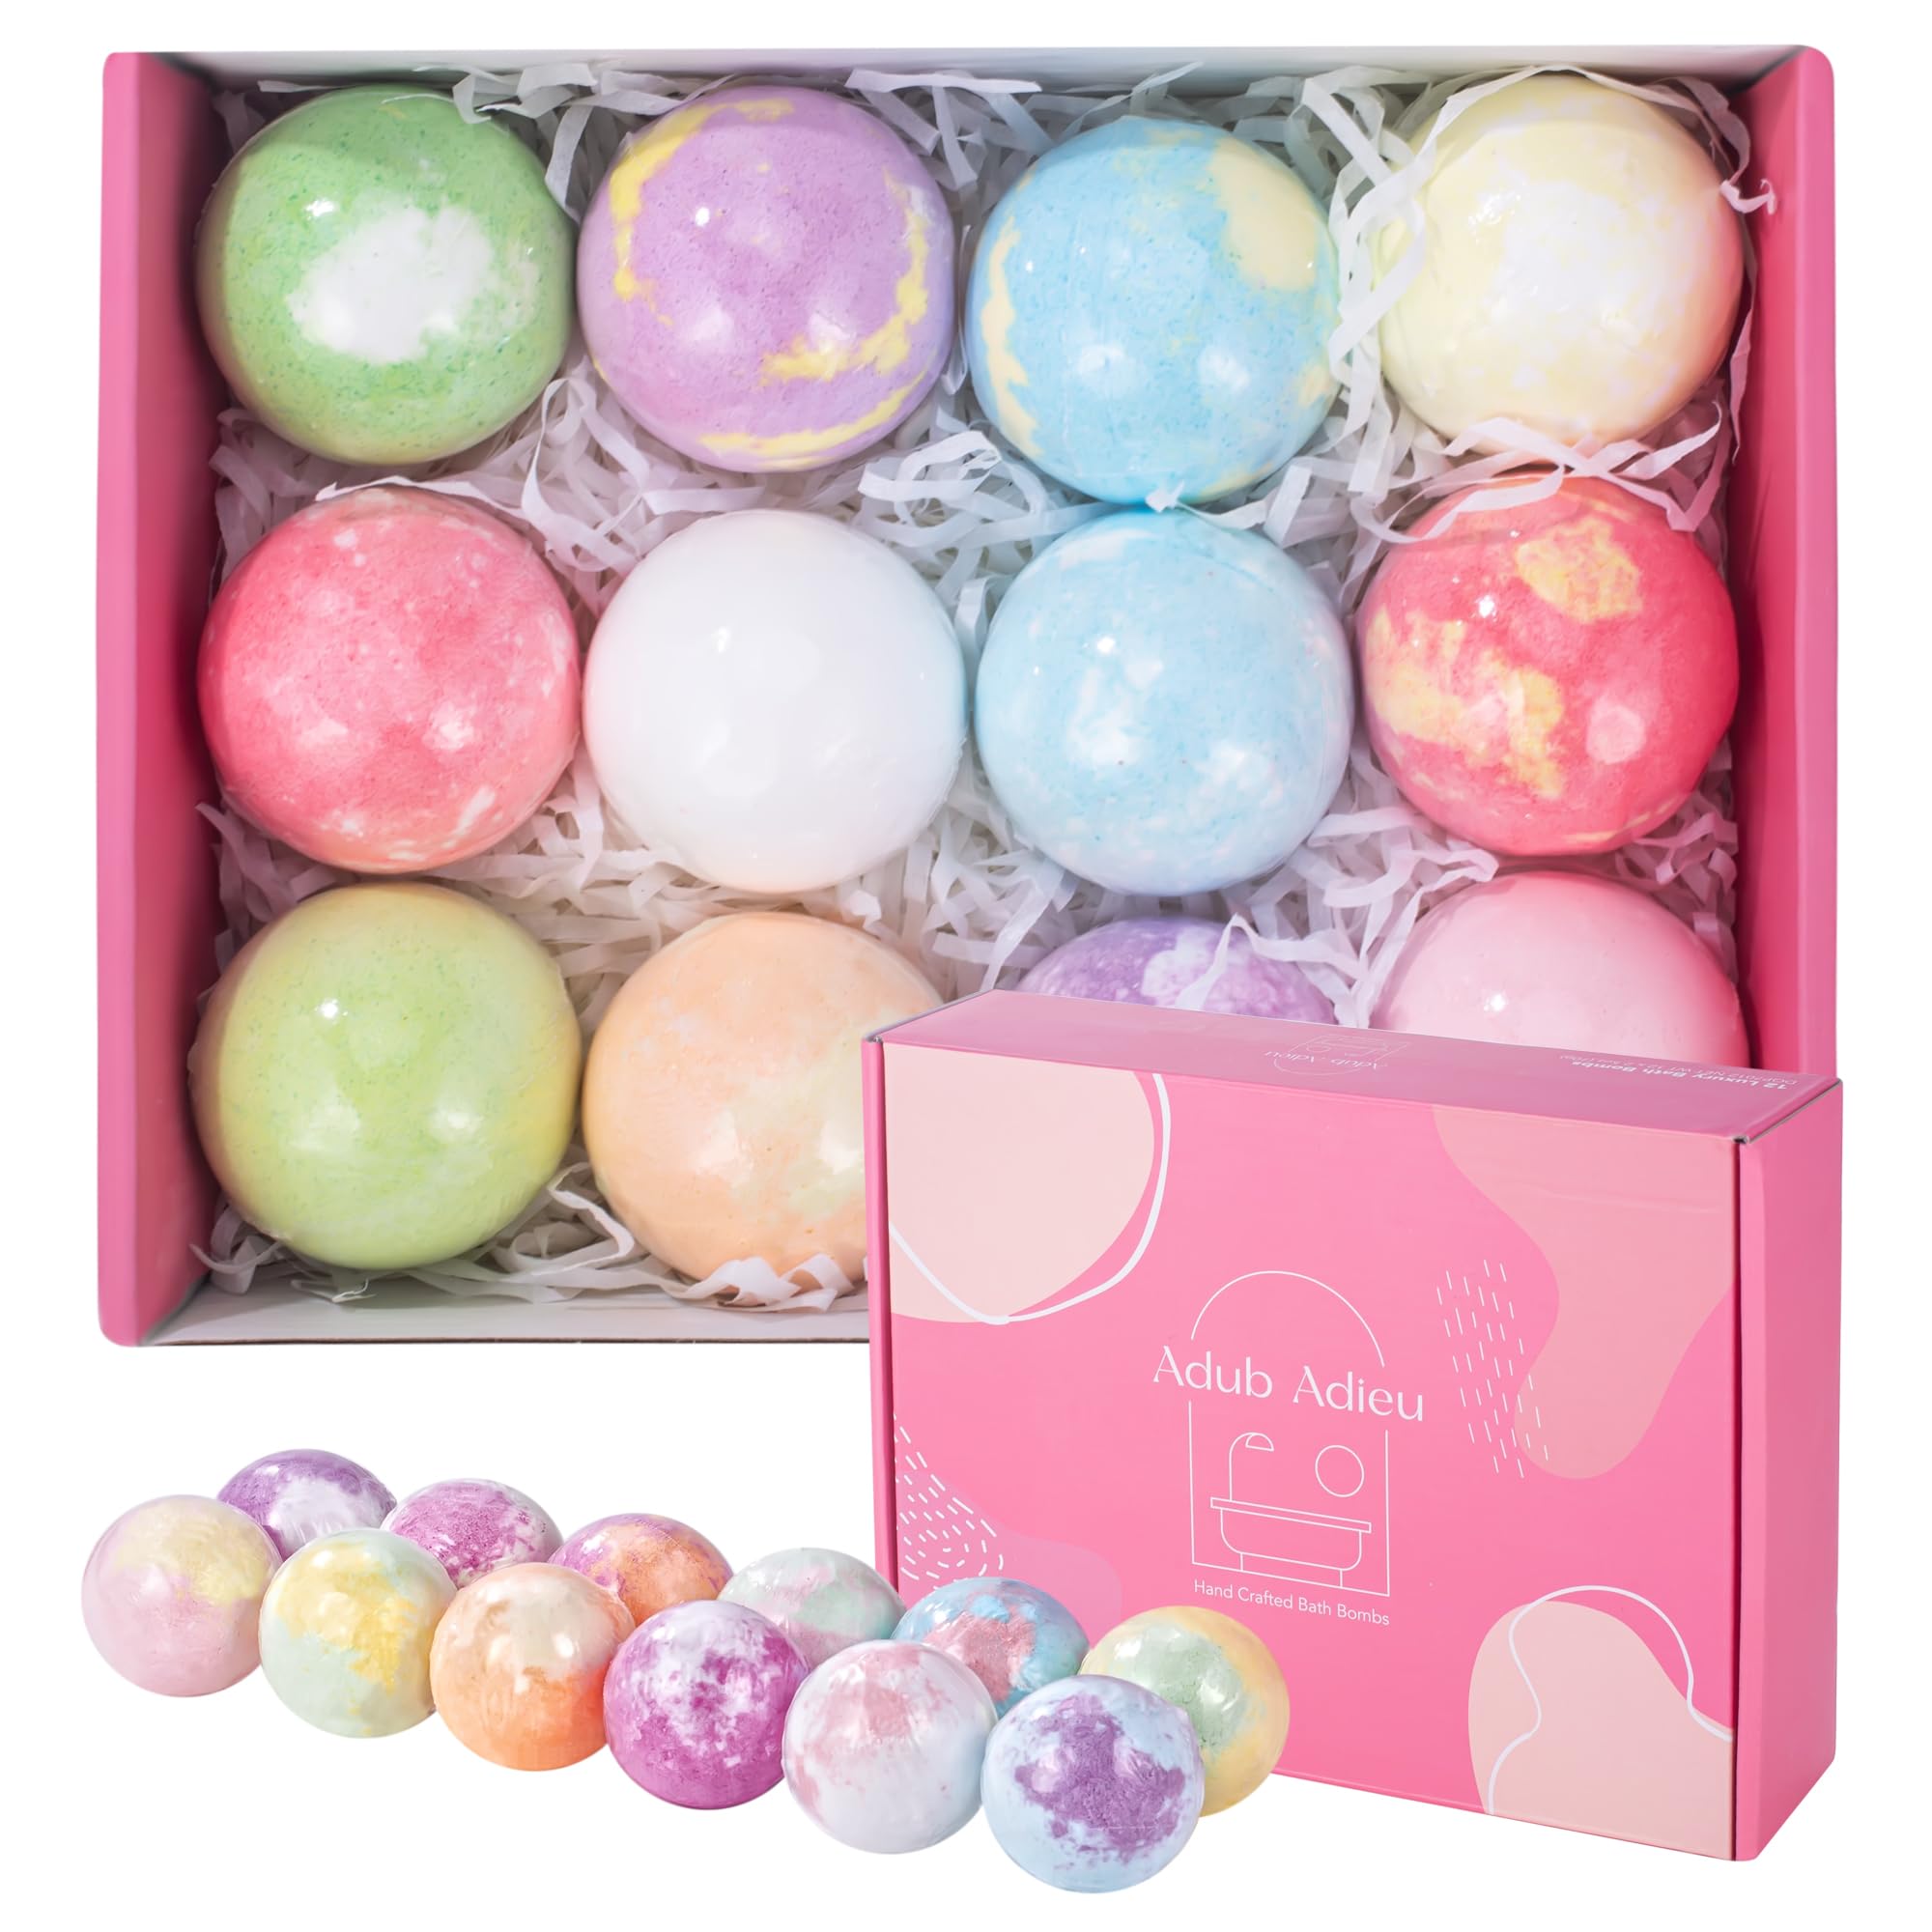 Sublime Beauty Group Bath Bombs for Women, 12 Large Bath Bomb Bubble Bath Set Spa Gifts for Women, Natural Handmade Bath Bombs Rich in Essential Oils, Romantic Gifts for Her, Wife, Multicolor